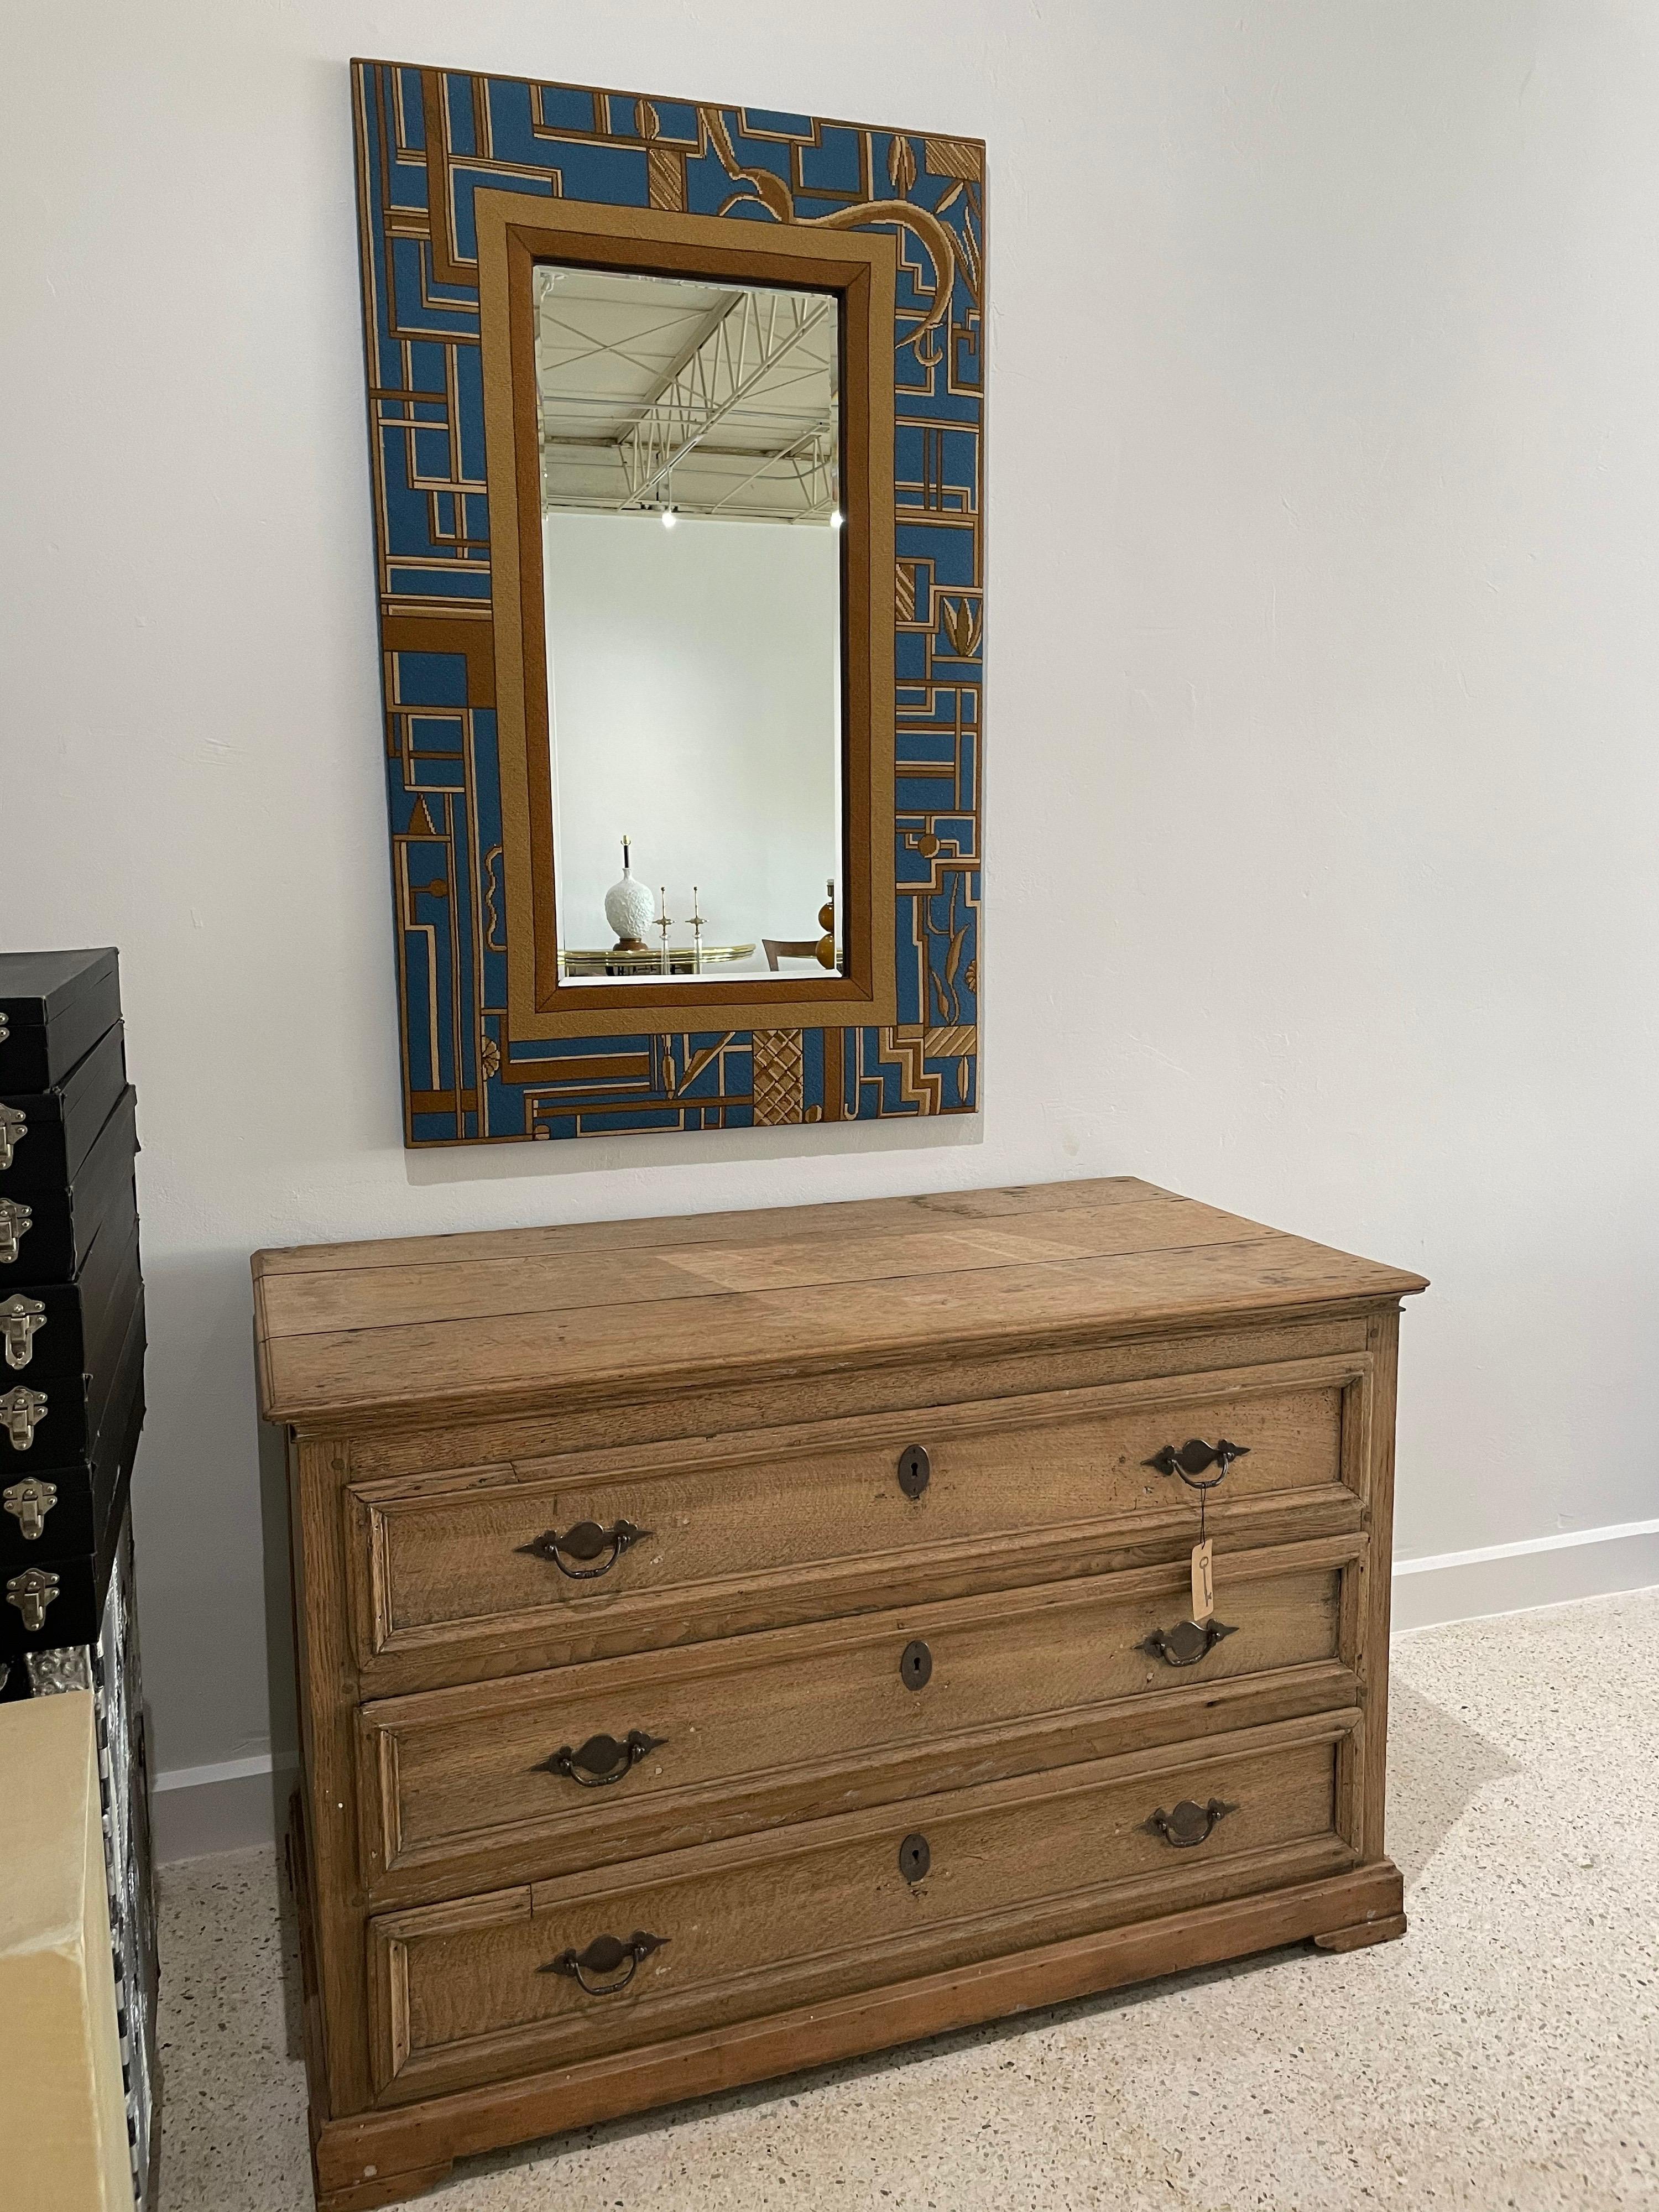 This is all original - hand made needlepoint in fine tight design. From the Art Deco design, the caramel, beige and blue tones are vivid and very clean. Bevelled mirror insert is perfect.